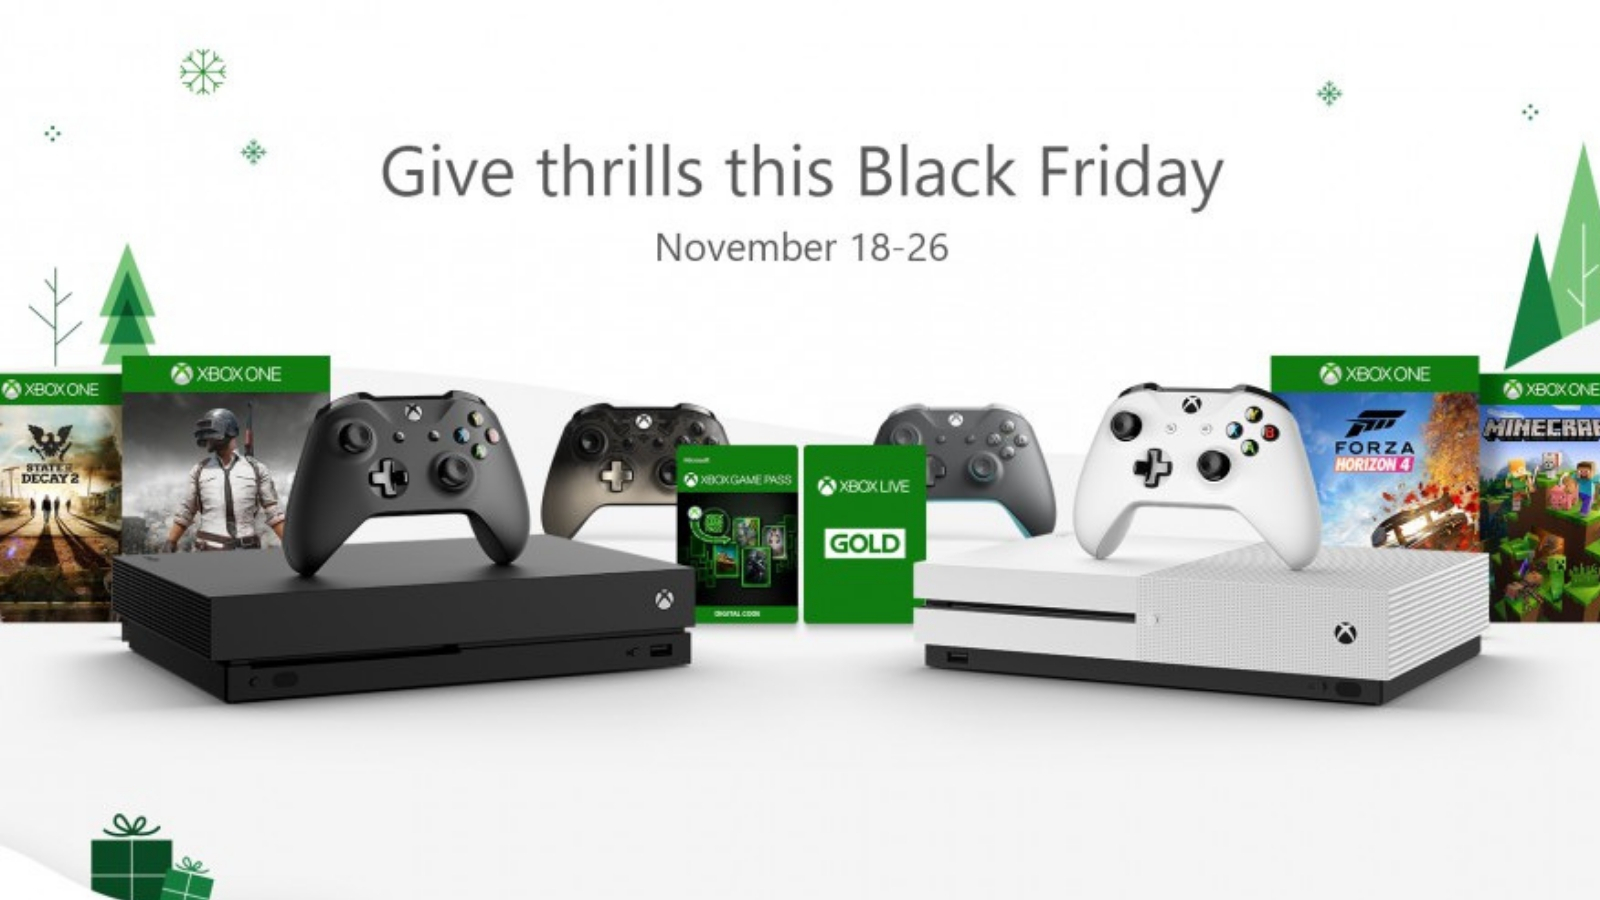 Black Friday 2018: Microsoft details discounts for Xbox console and